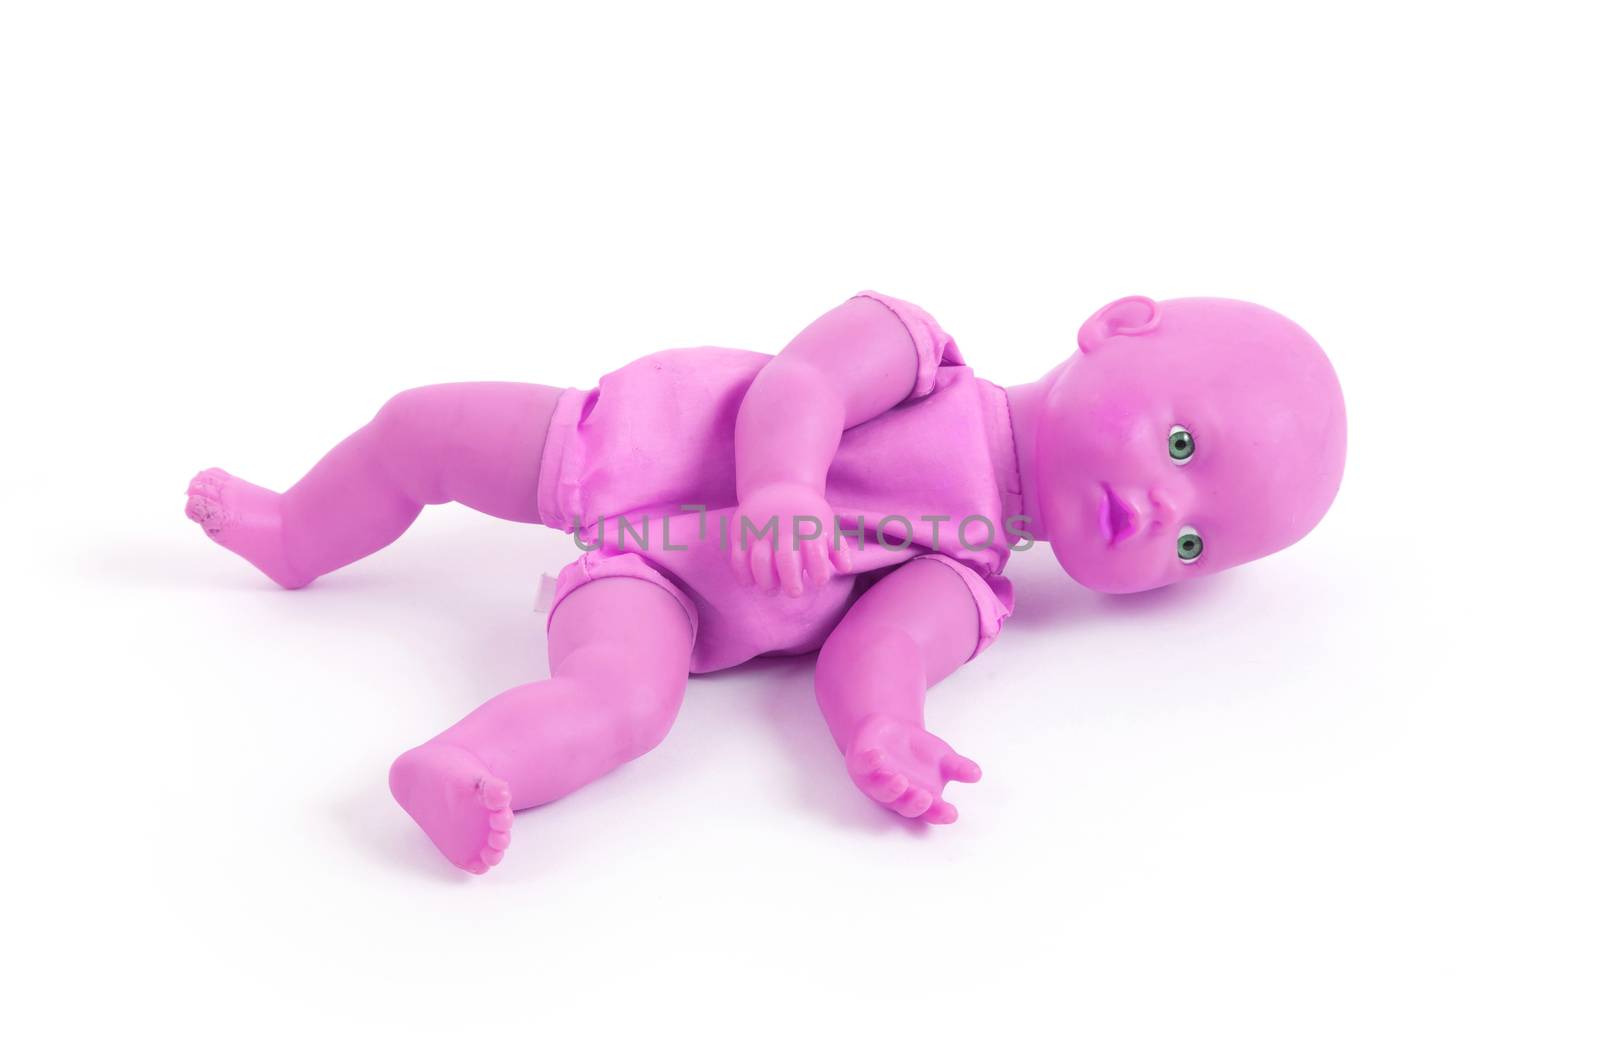 Baby toy (no trademark), isolated on white